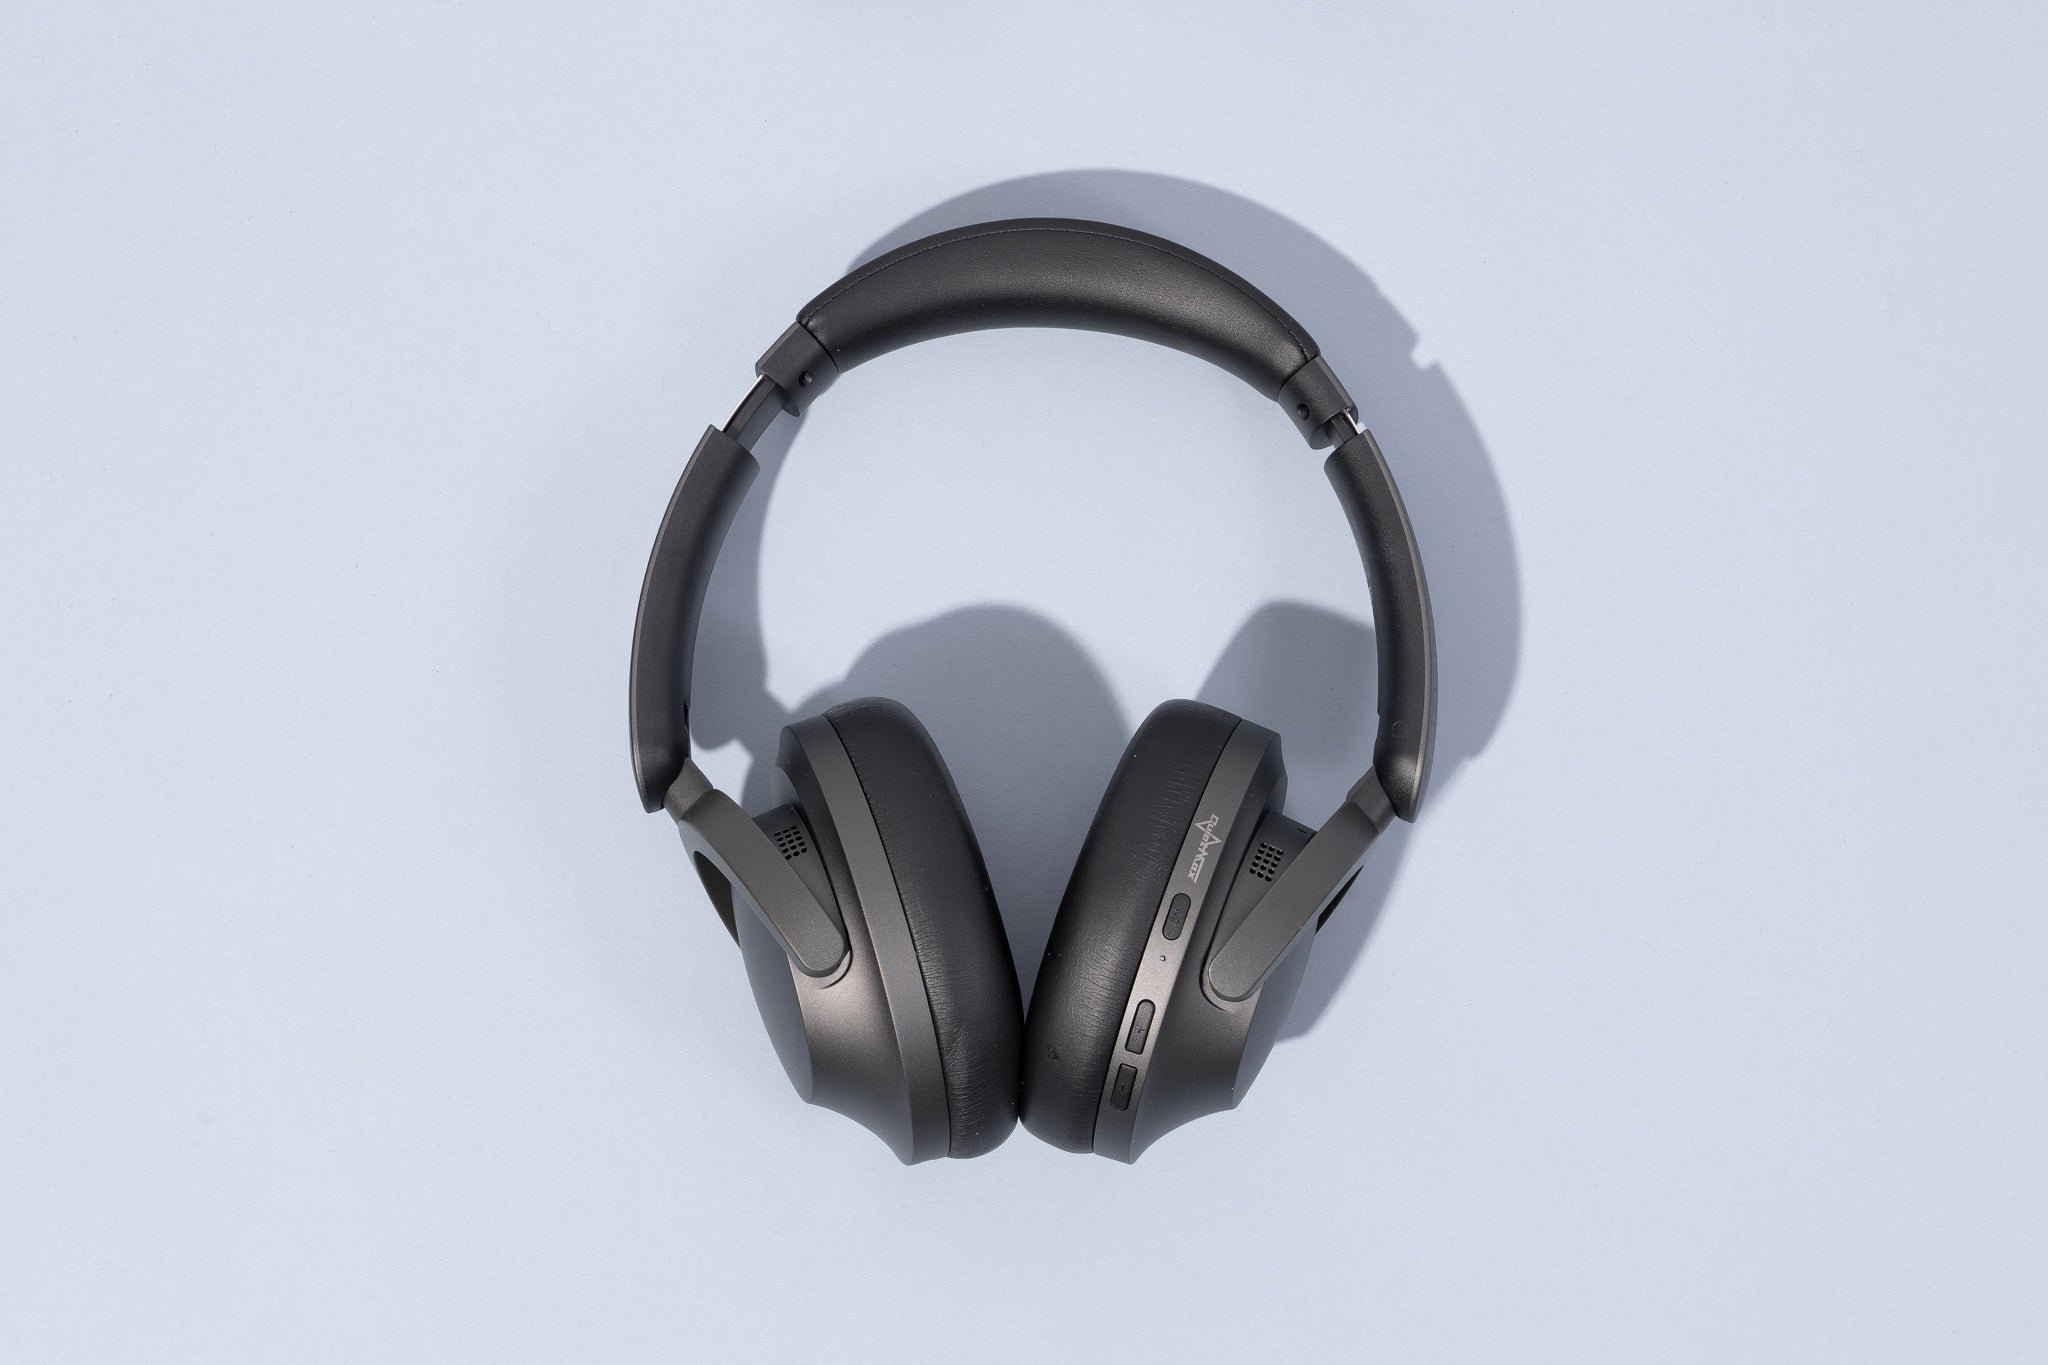 Consider headphones with noise cancellation